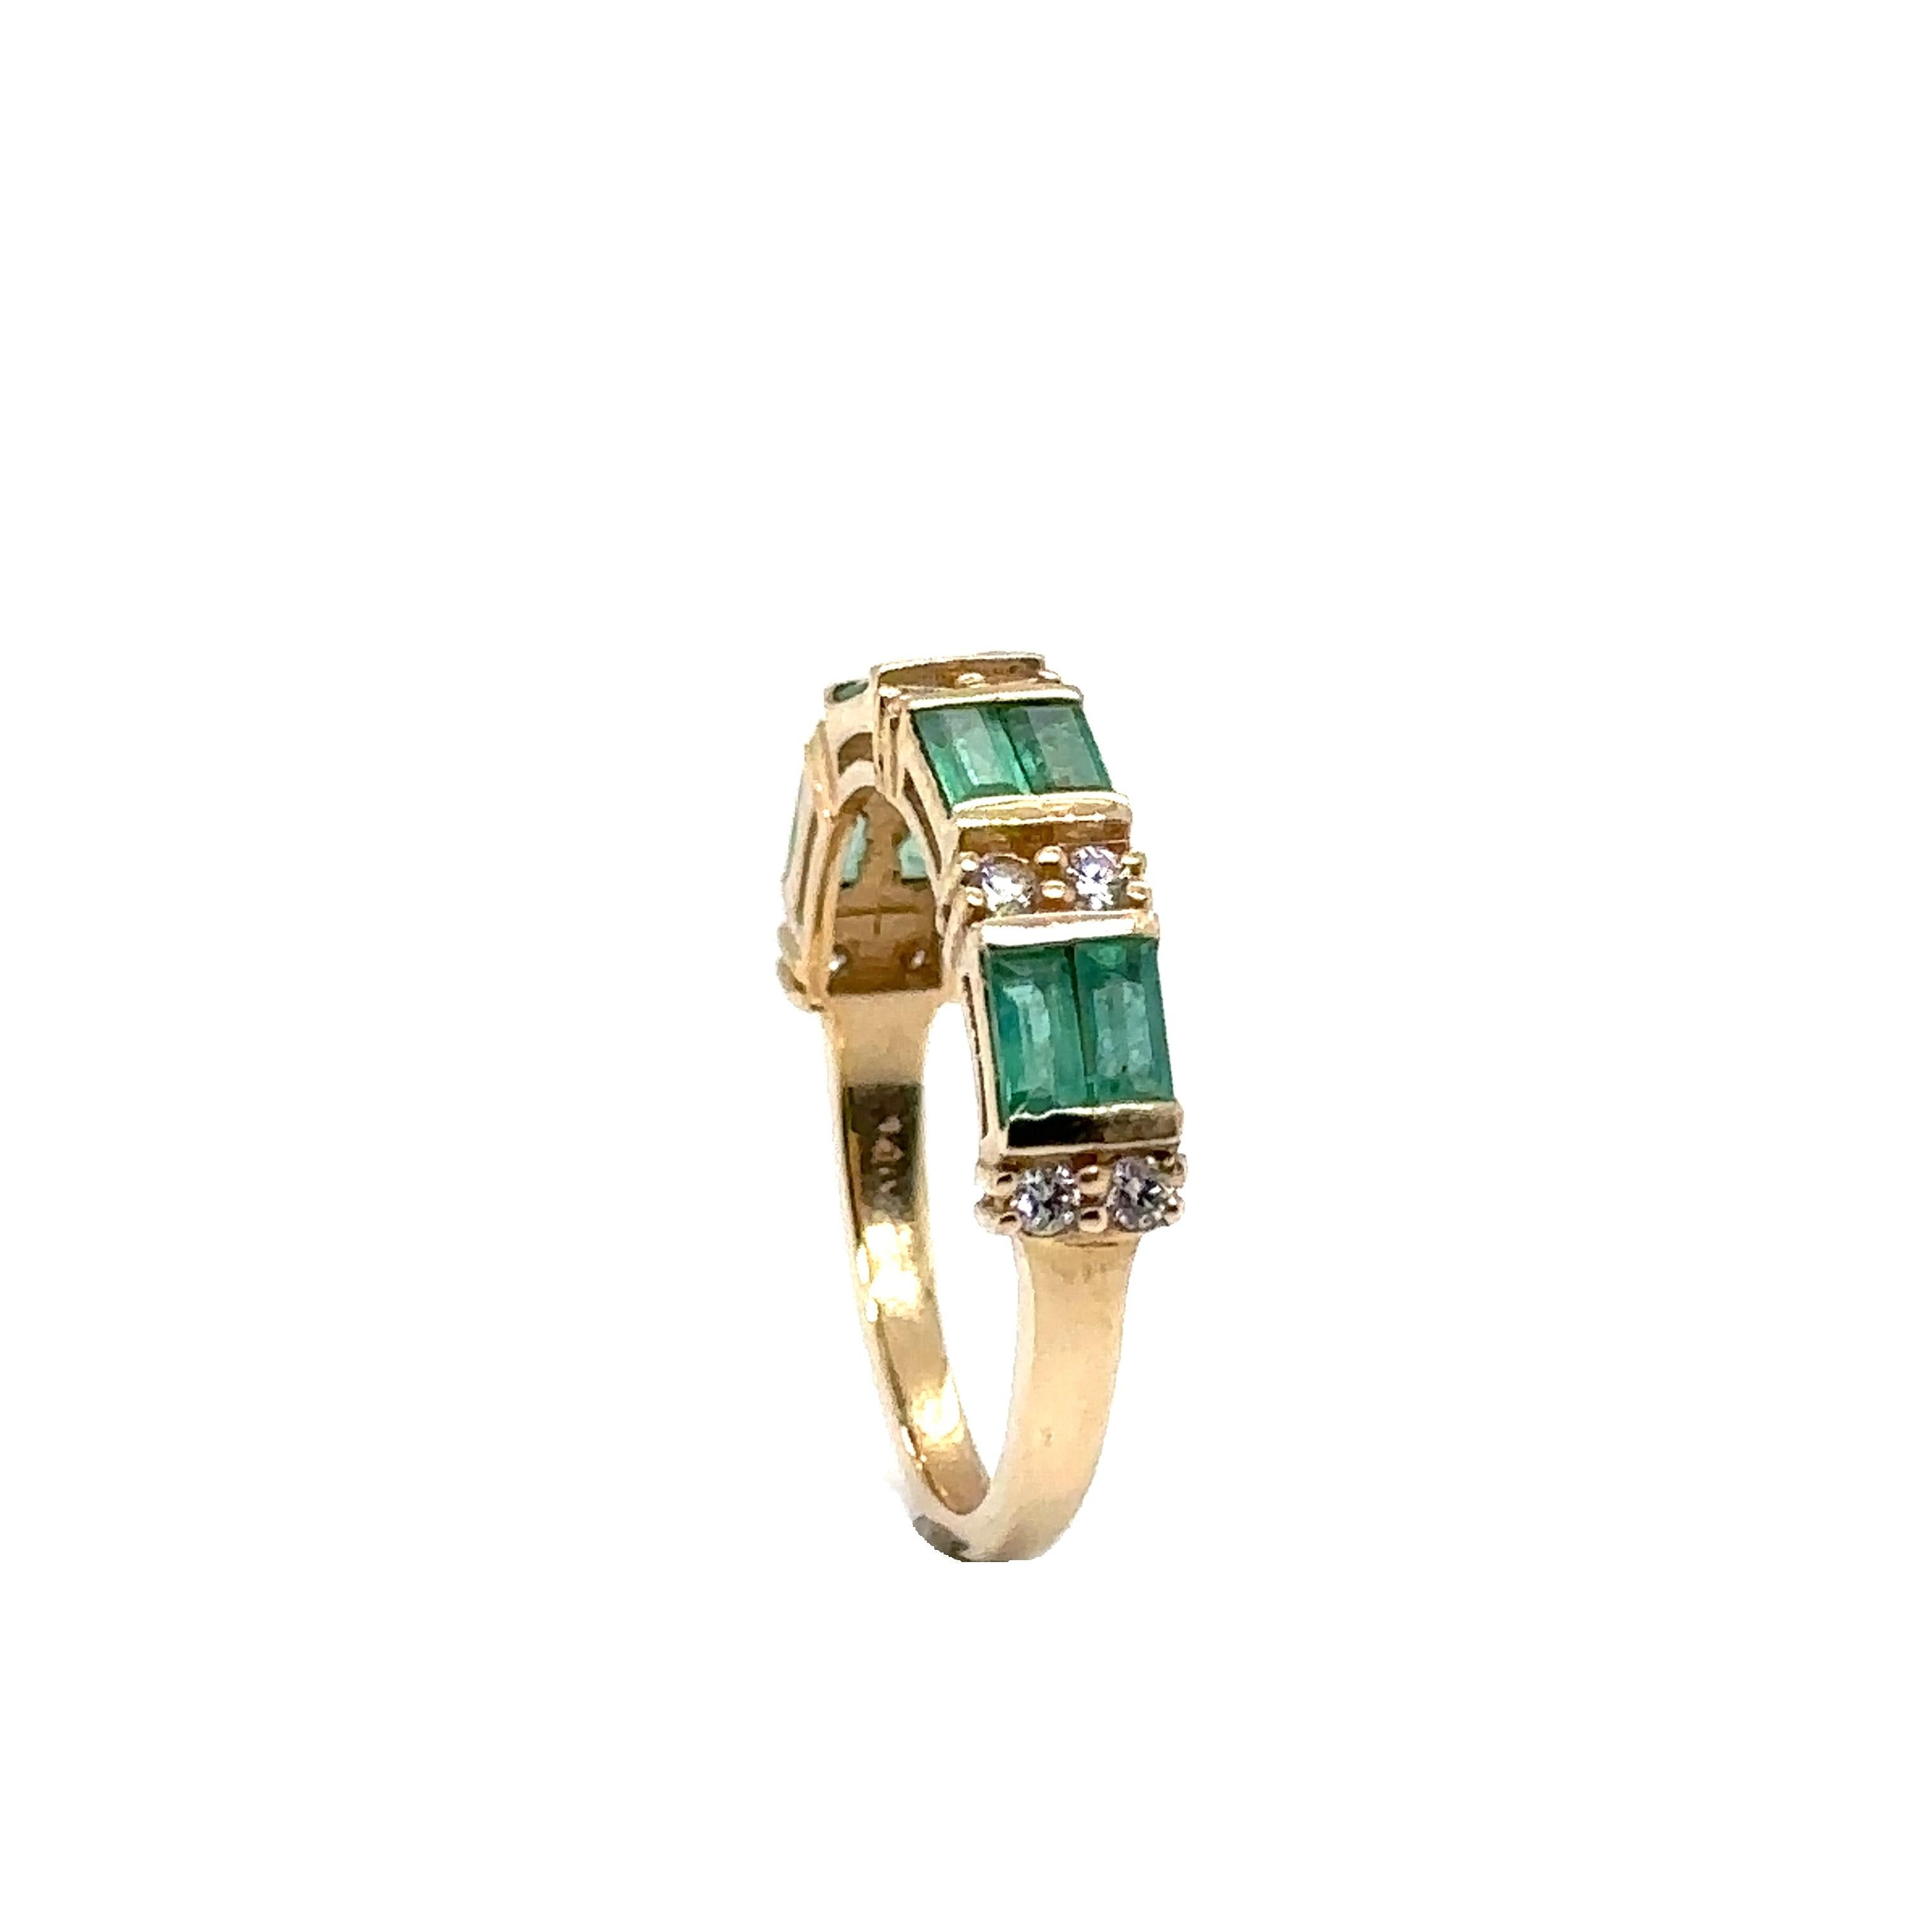 14K YELLOW GOLD 0.20Ct G/H SI1 DIAS. & 0.90CT BAGUETTE EMERALDS
Metal: 14K YELLOW GOLD
Diamond Info: G-H/SI1 DIAS
Total Diamonds Weight:  0.20 cwt.
Stones info: BAGUETTE CUT EMERALDS
Total Stones Weight: 0.90 cwt.
Item Weight: 3.10 gm
Ring Size: 7